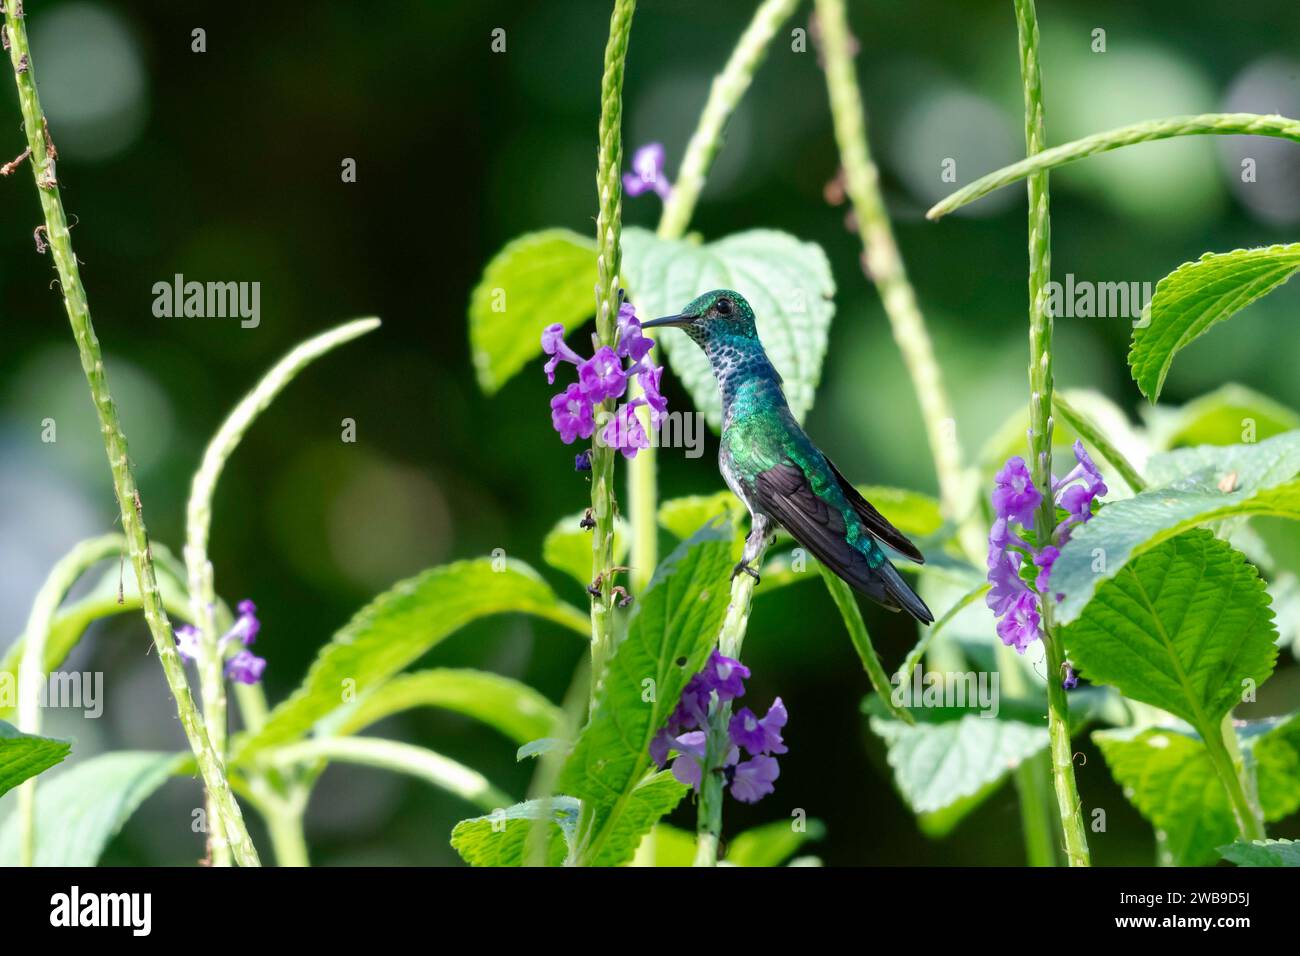 Blue-chinned Sapphire hummingbird, Chlorestes notata, stretches her neck to drink nectar from a blossom in a flowering plant Stock Photo